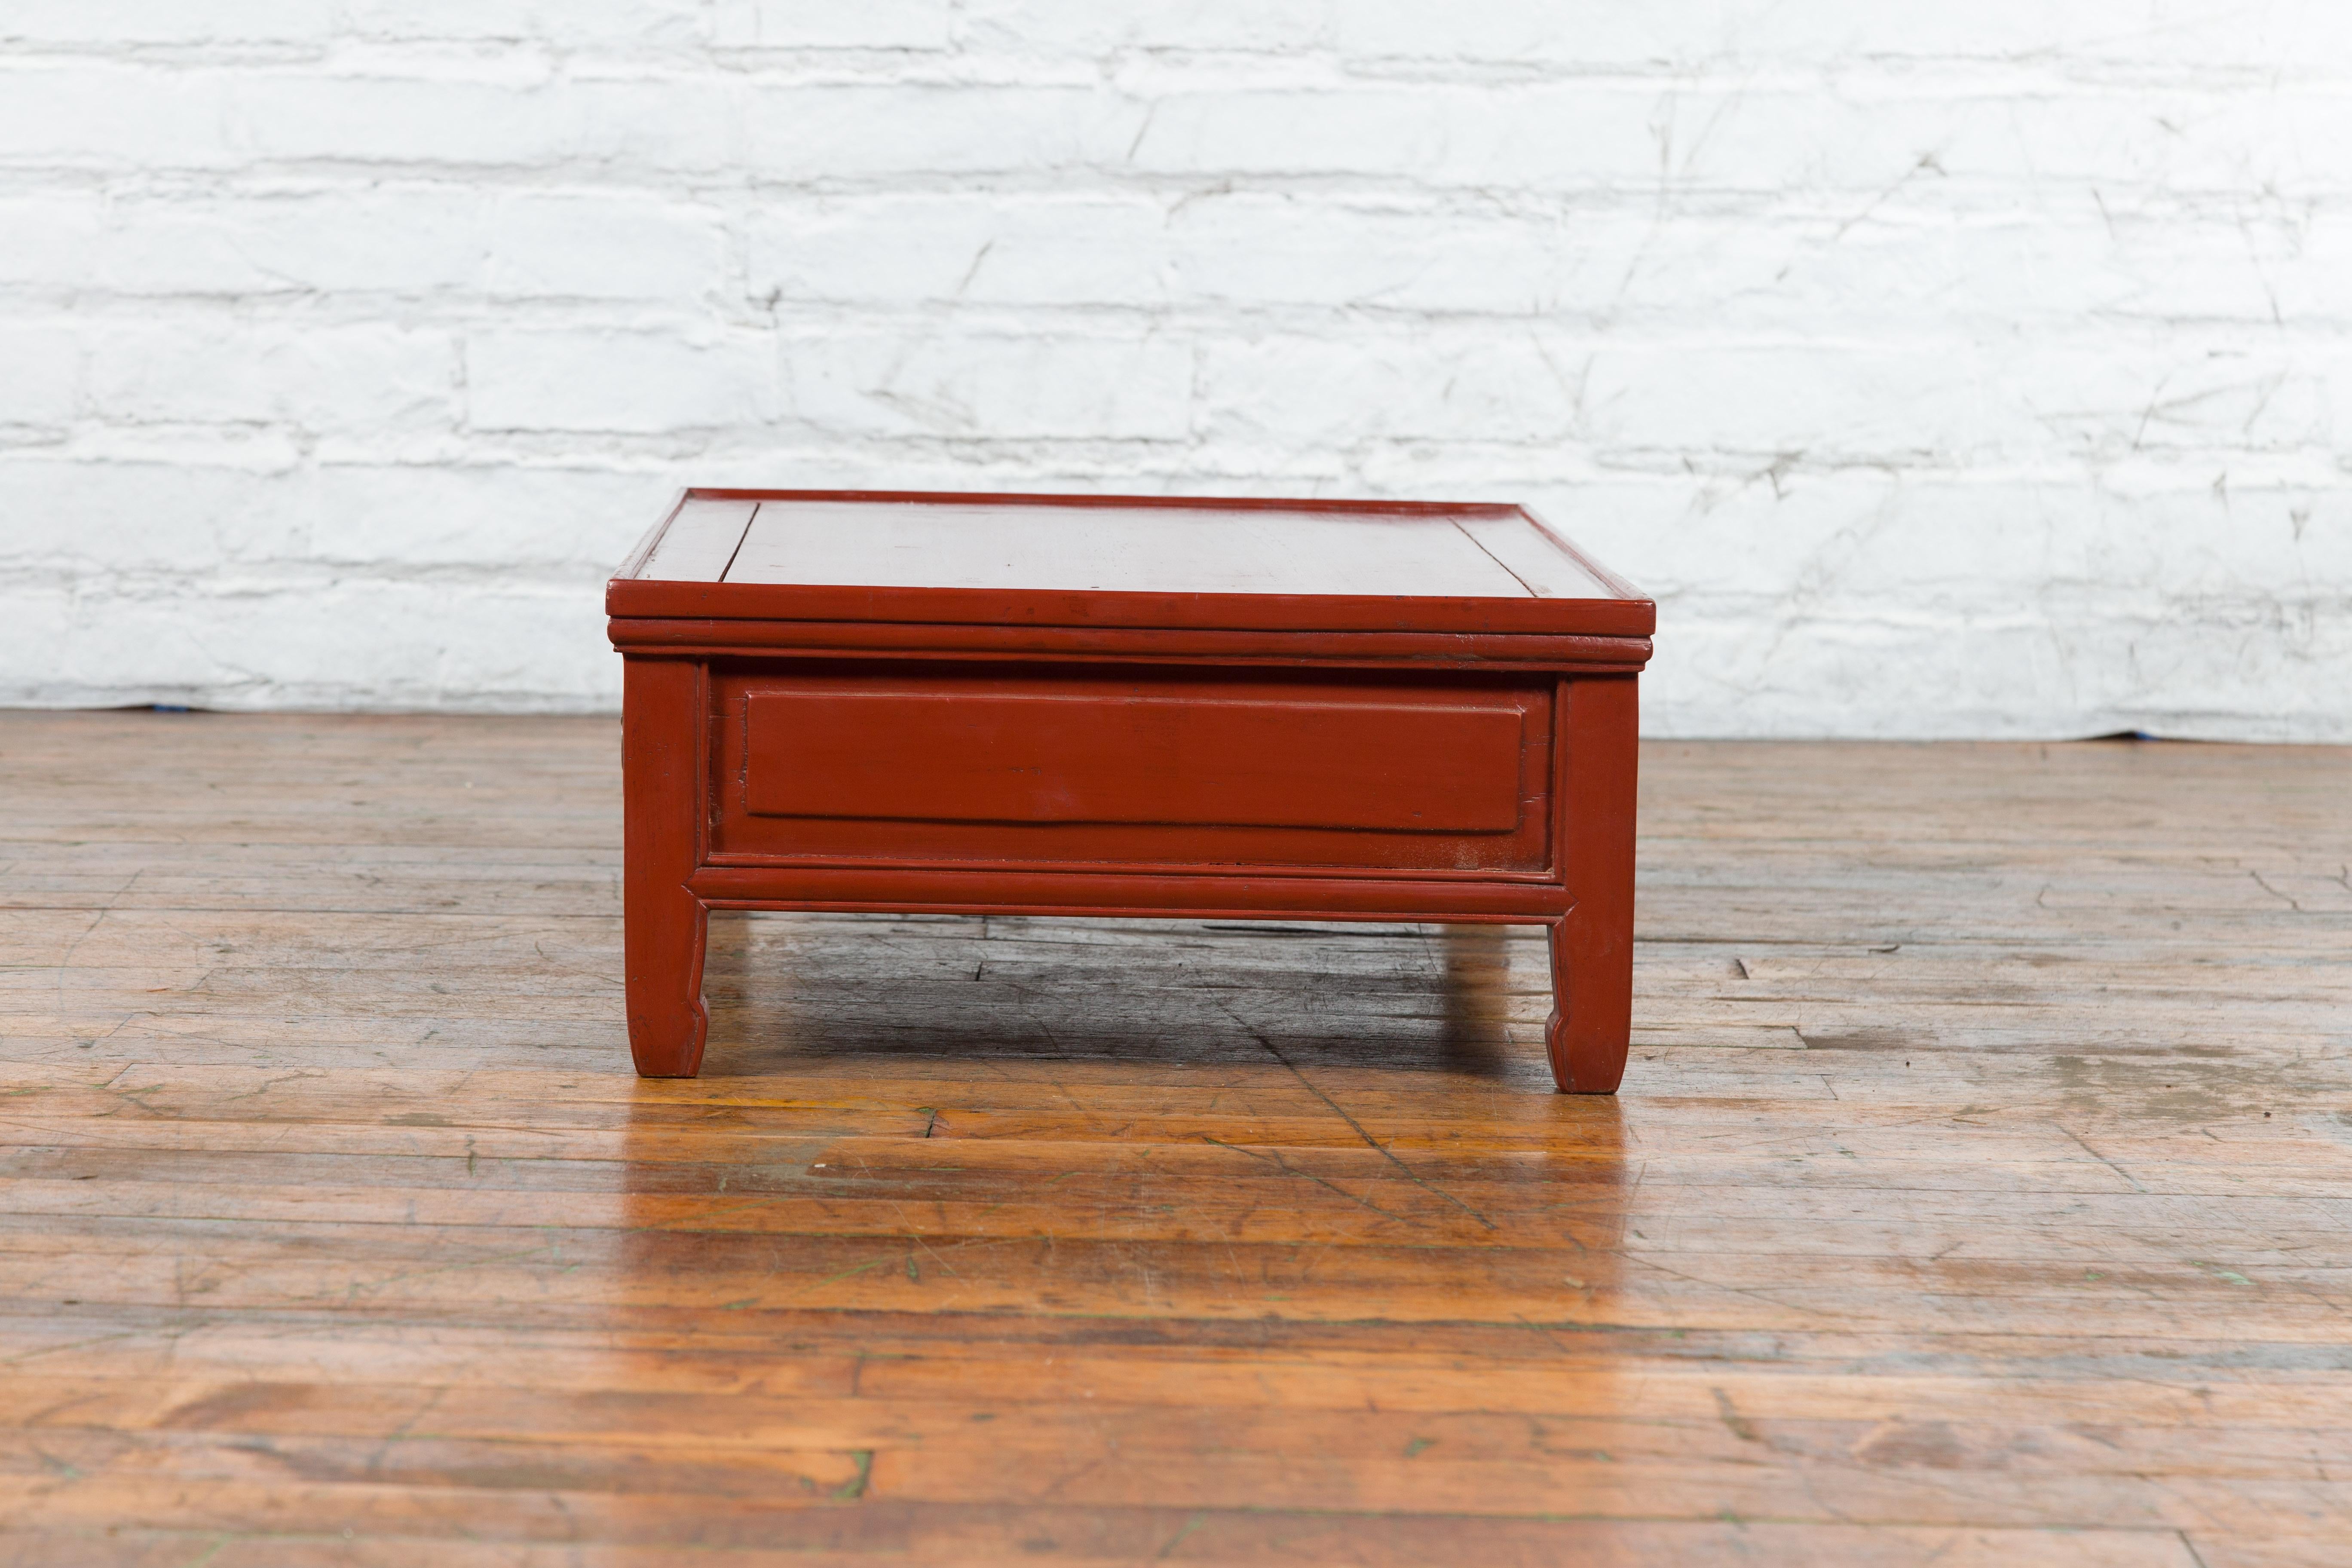 Qing Dynasty Red Lacquer Low Kang Coffee Table with Drawers and Horse Hoof Feet For Sale 5